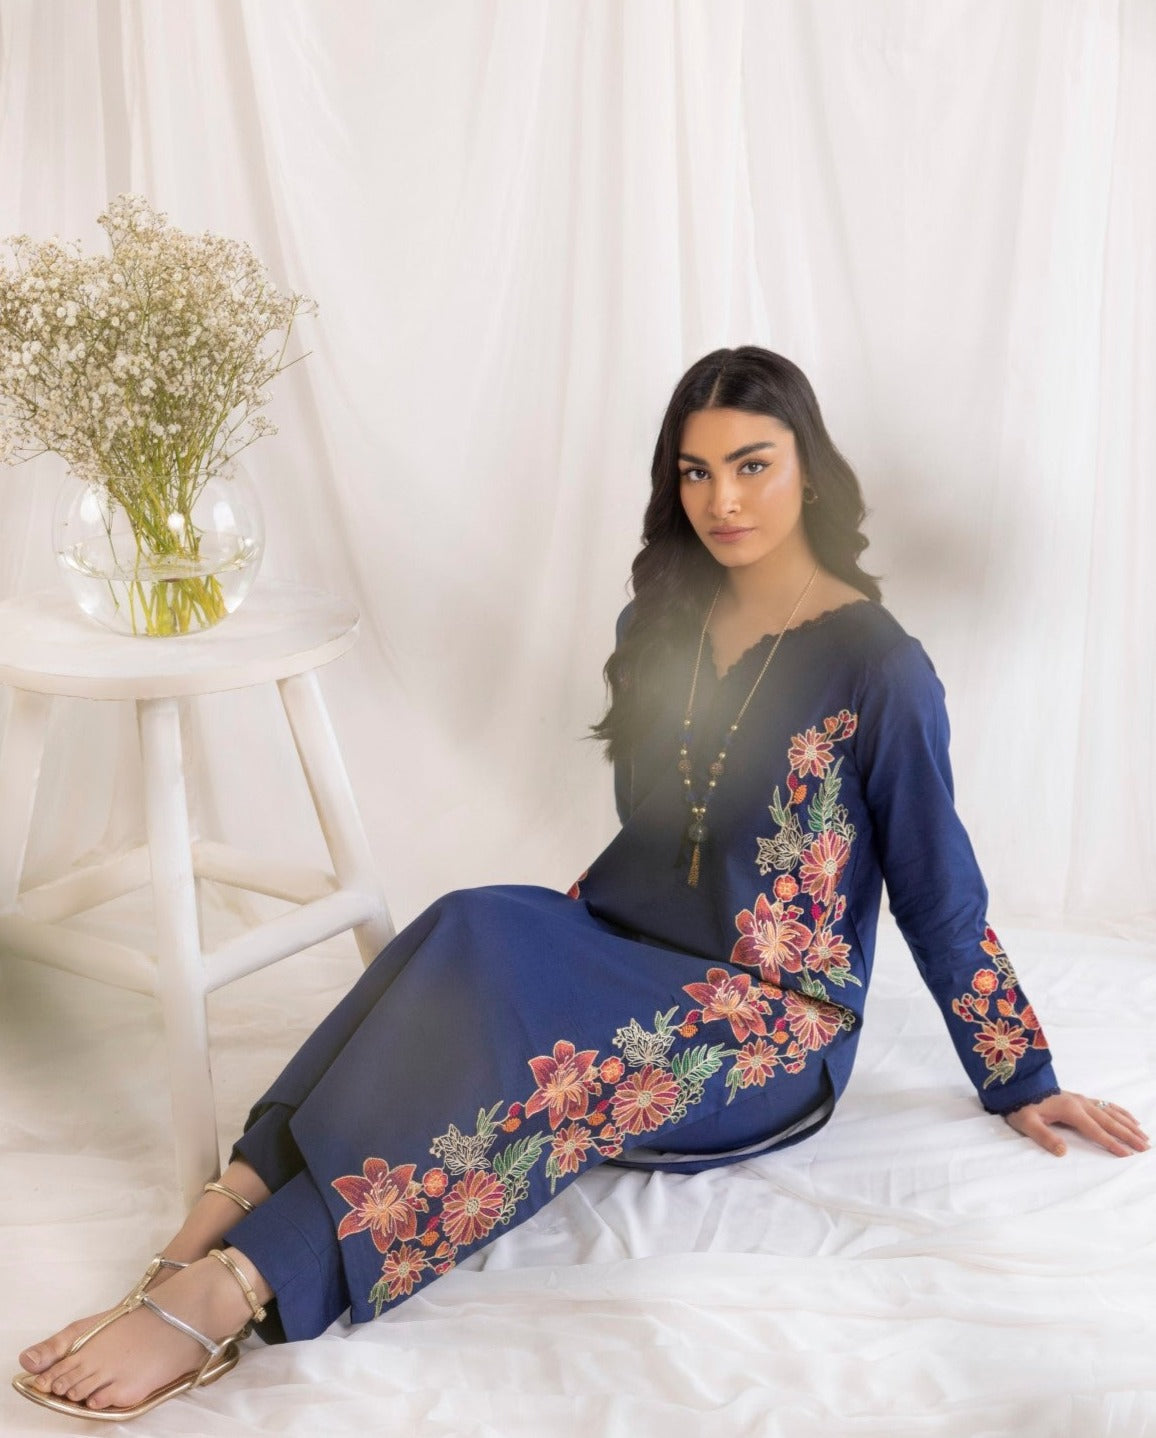 LEM-17 2PC EMBROIDERED LAWN STITCHED